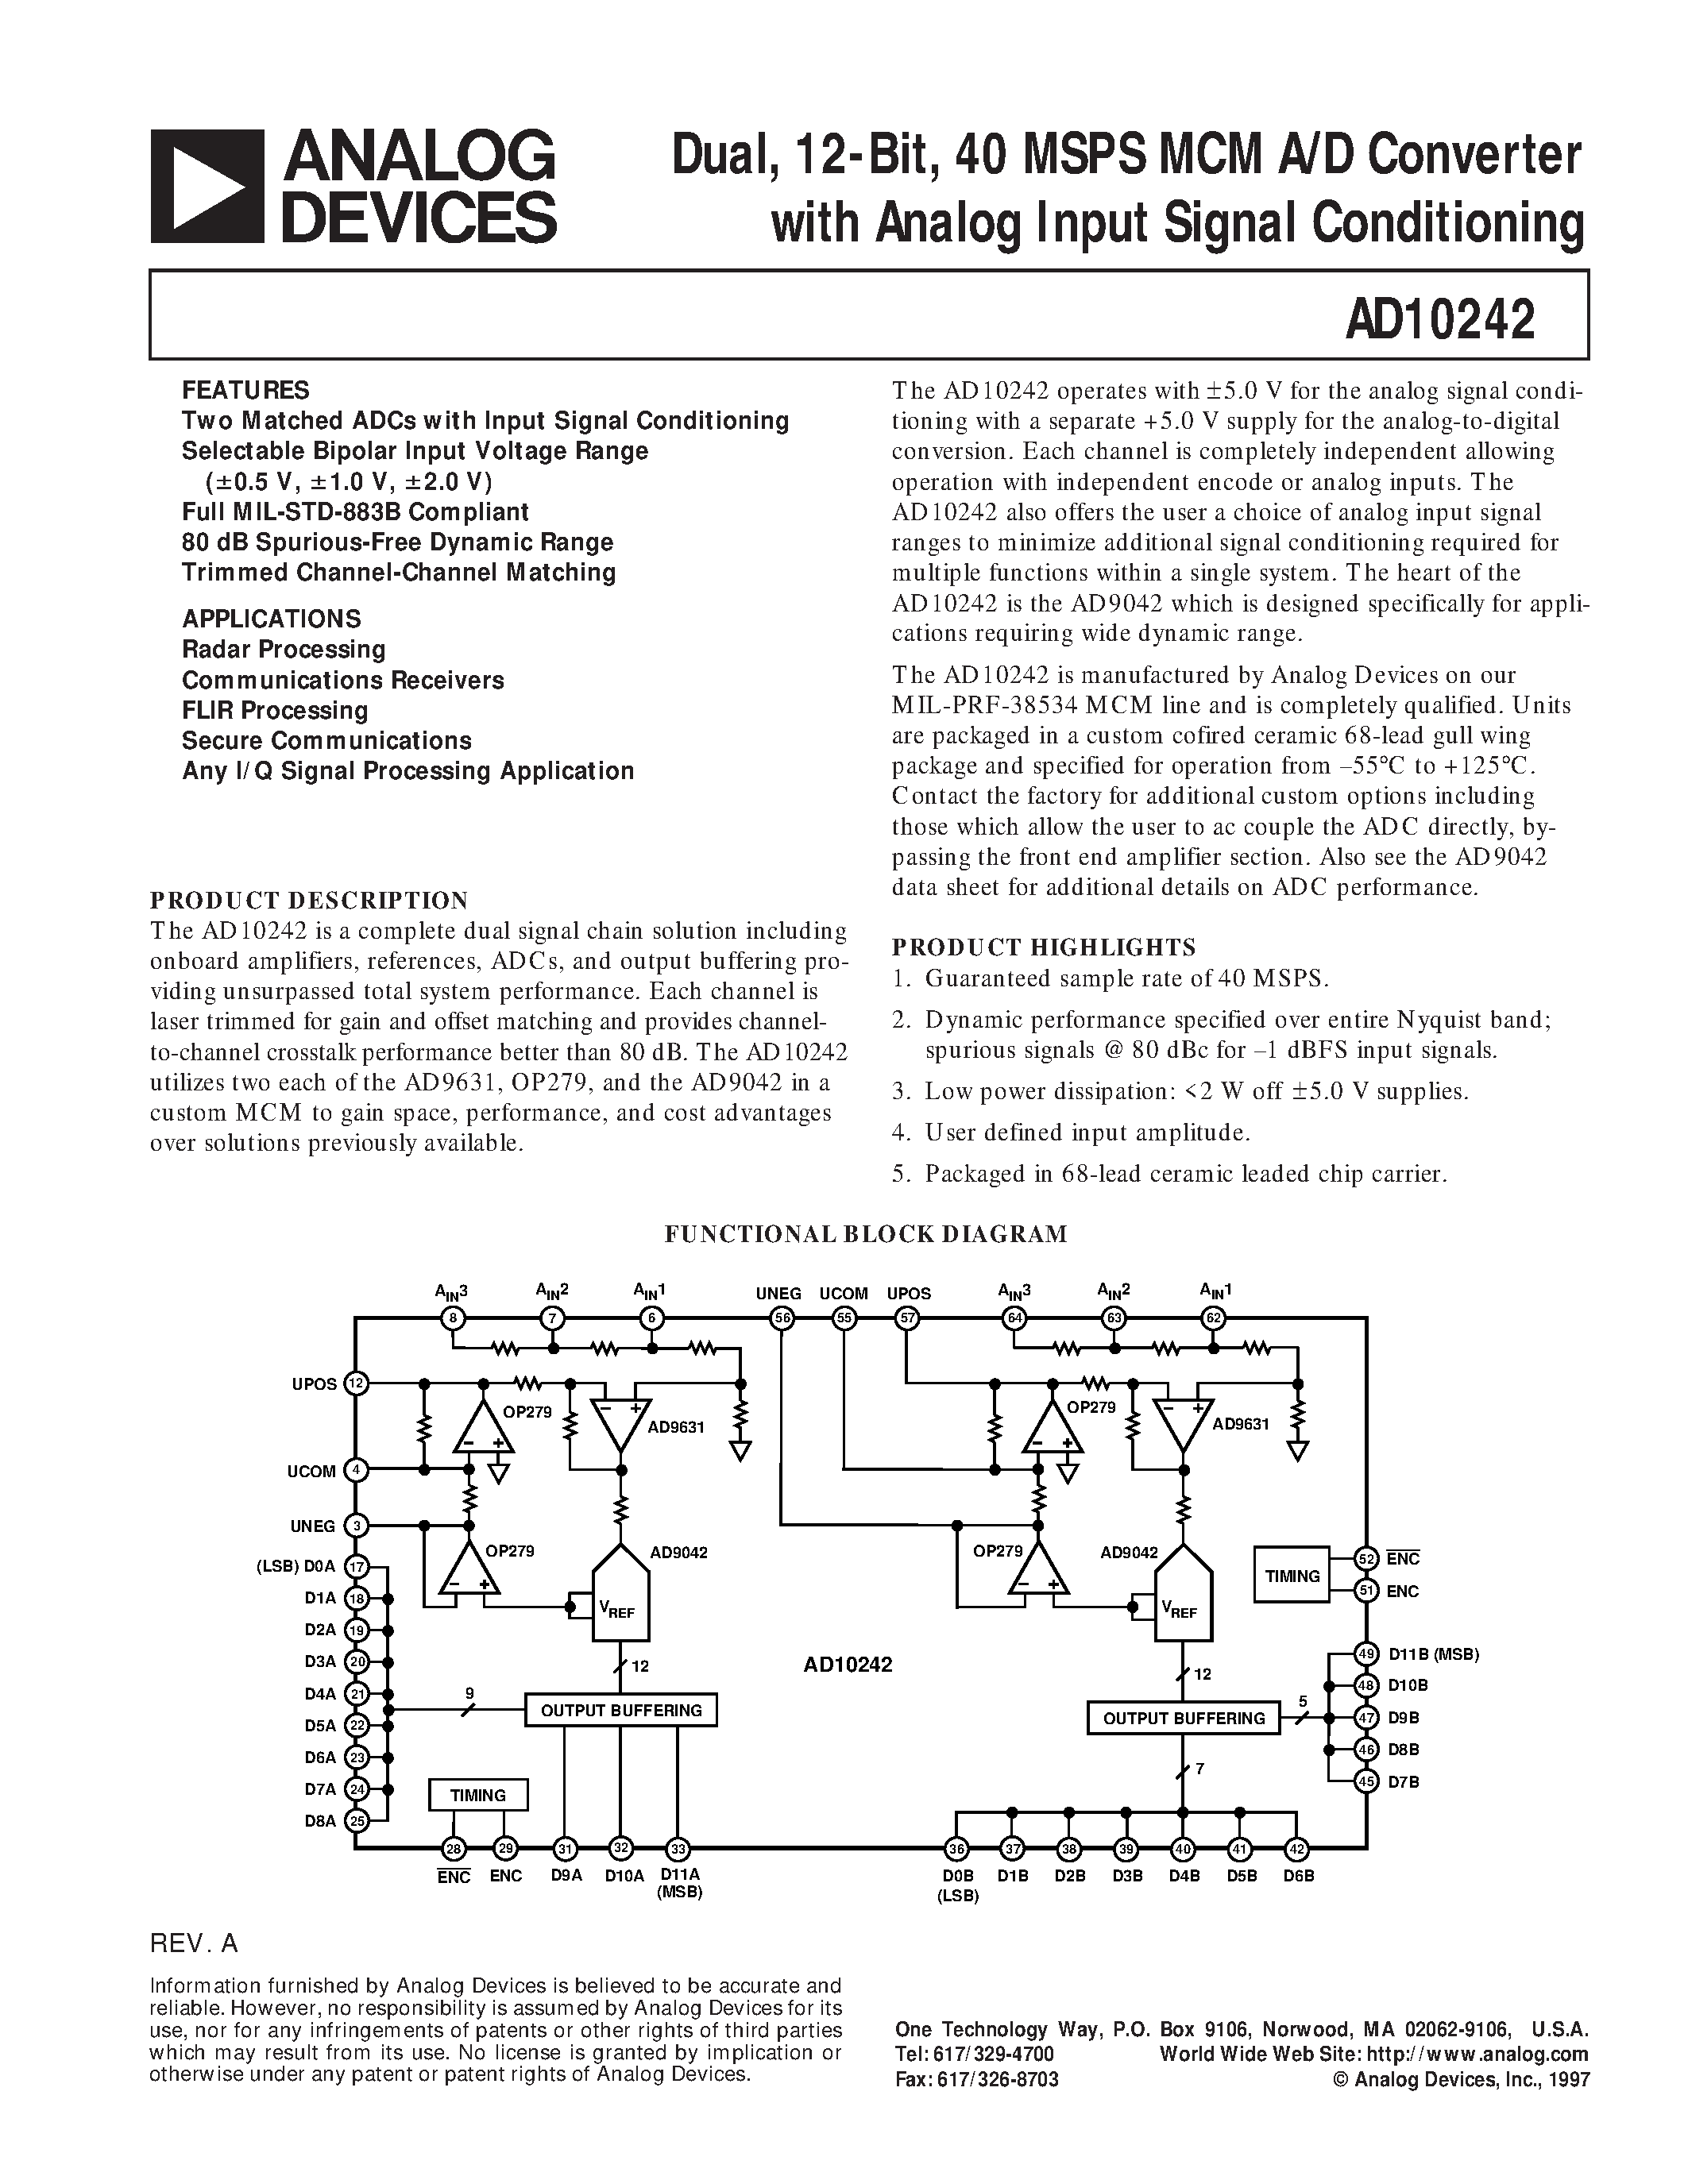 Datasheet AD10242TZ - Dual/ 12-Bit/ 40 MSPS MCM A/D Converter with Analog Input Signal Conditioning page 1